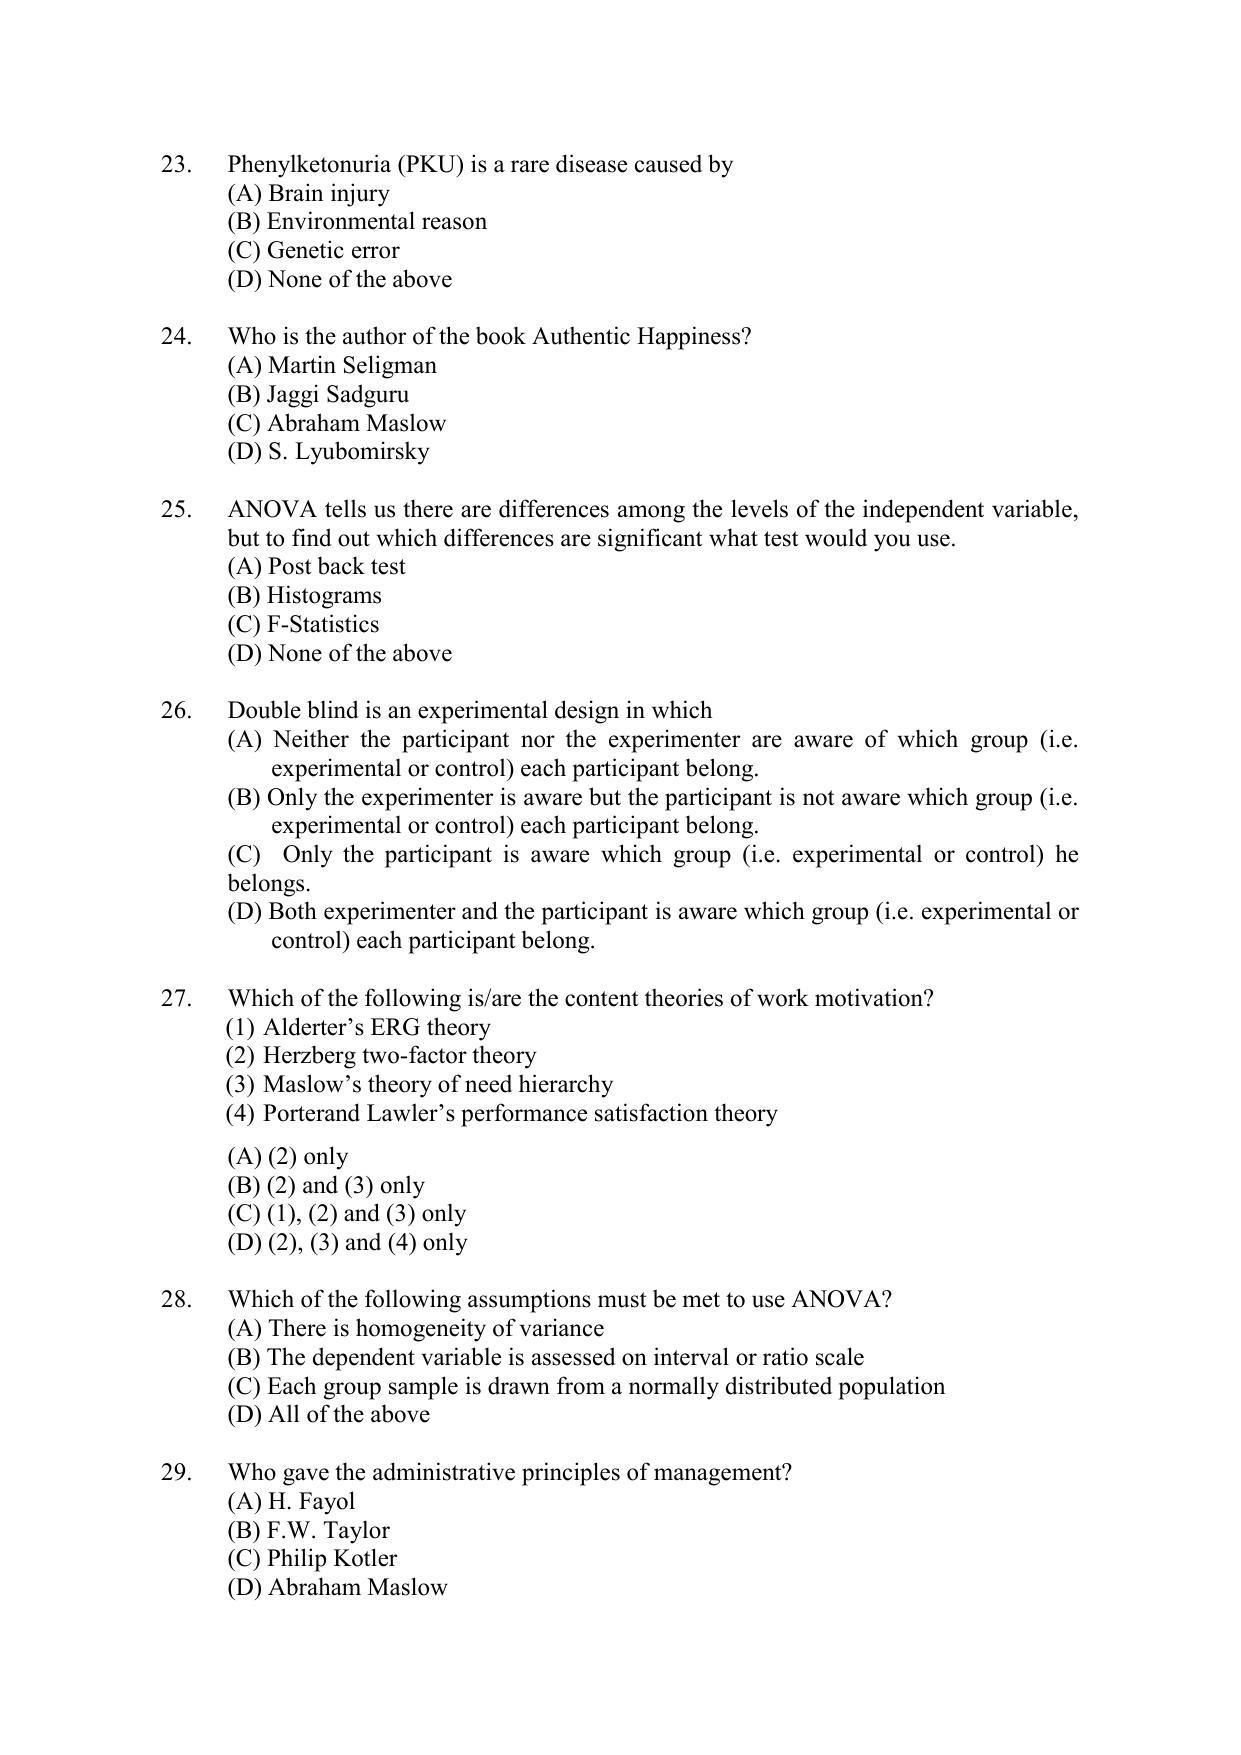 PU MPET Ancient Indian History & Archeology 2022 Question Papers - Page 35